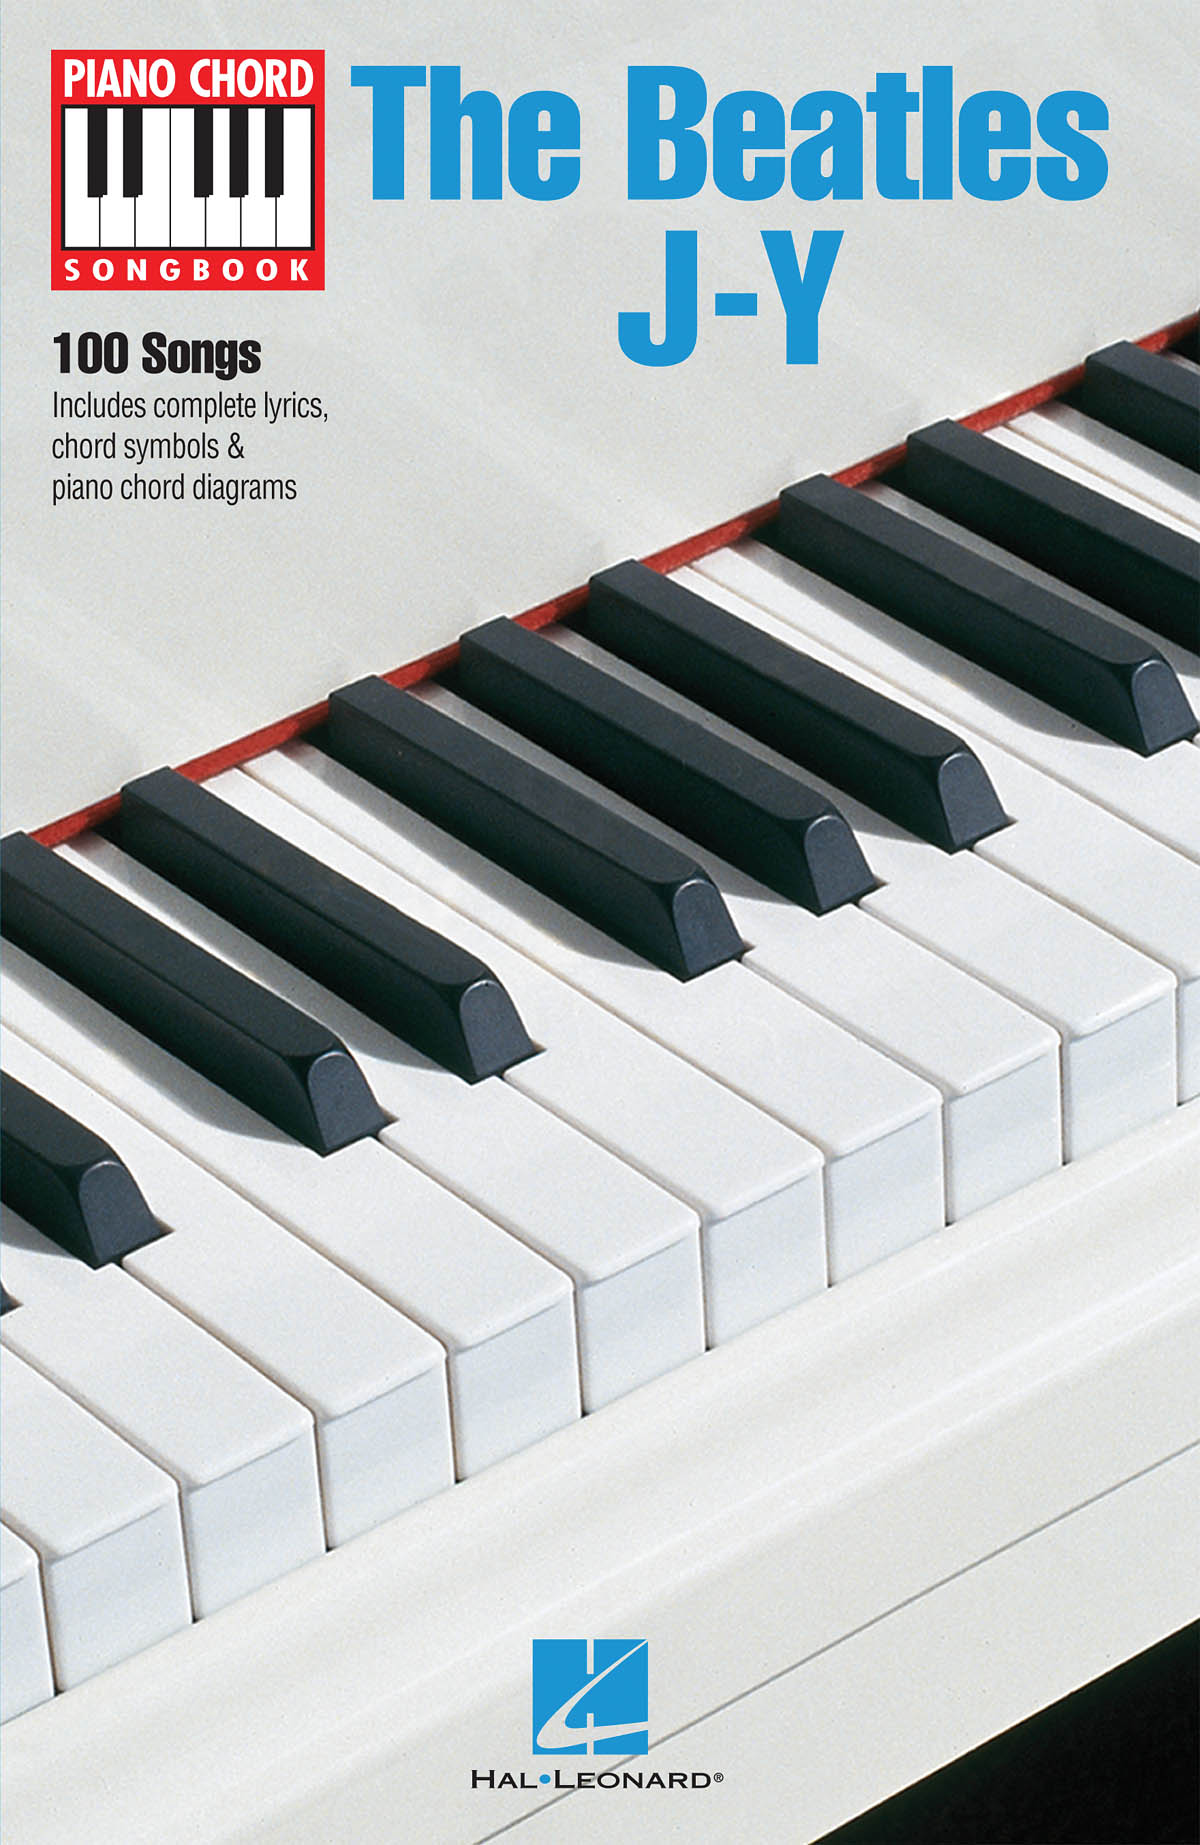 Piano Chord Songbook - The Beatles J-Y - texty s akordy pro kytaru